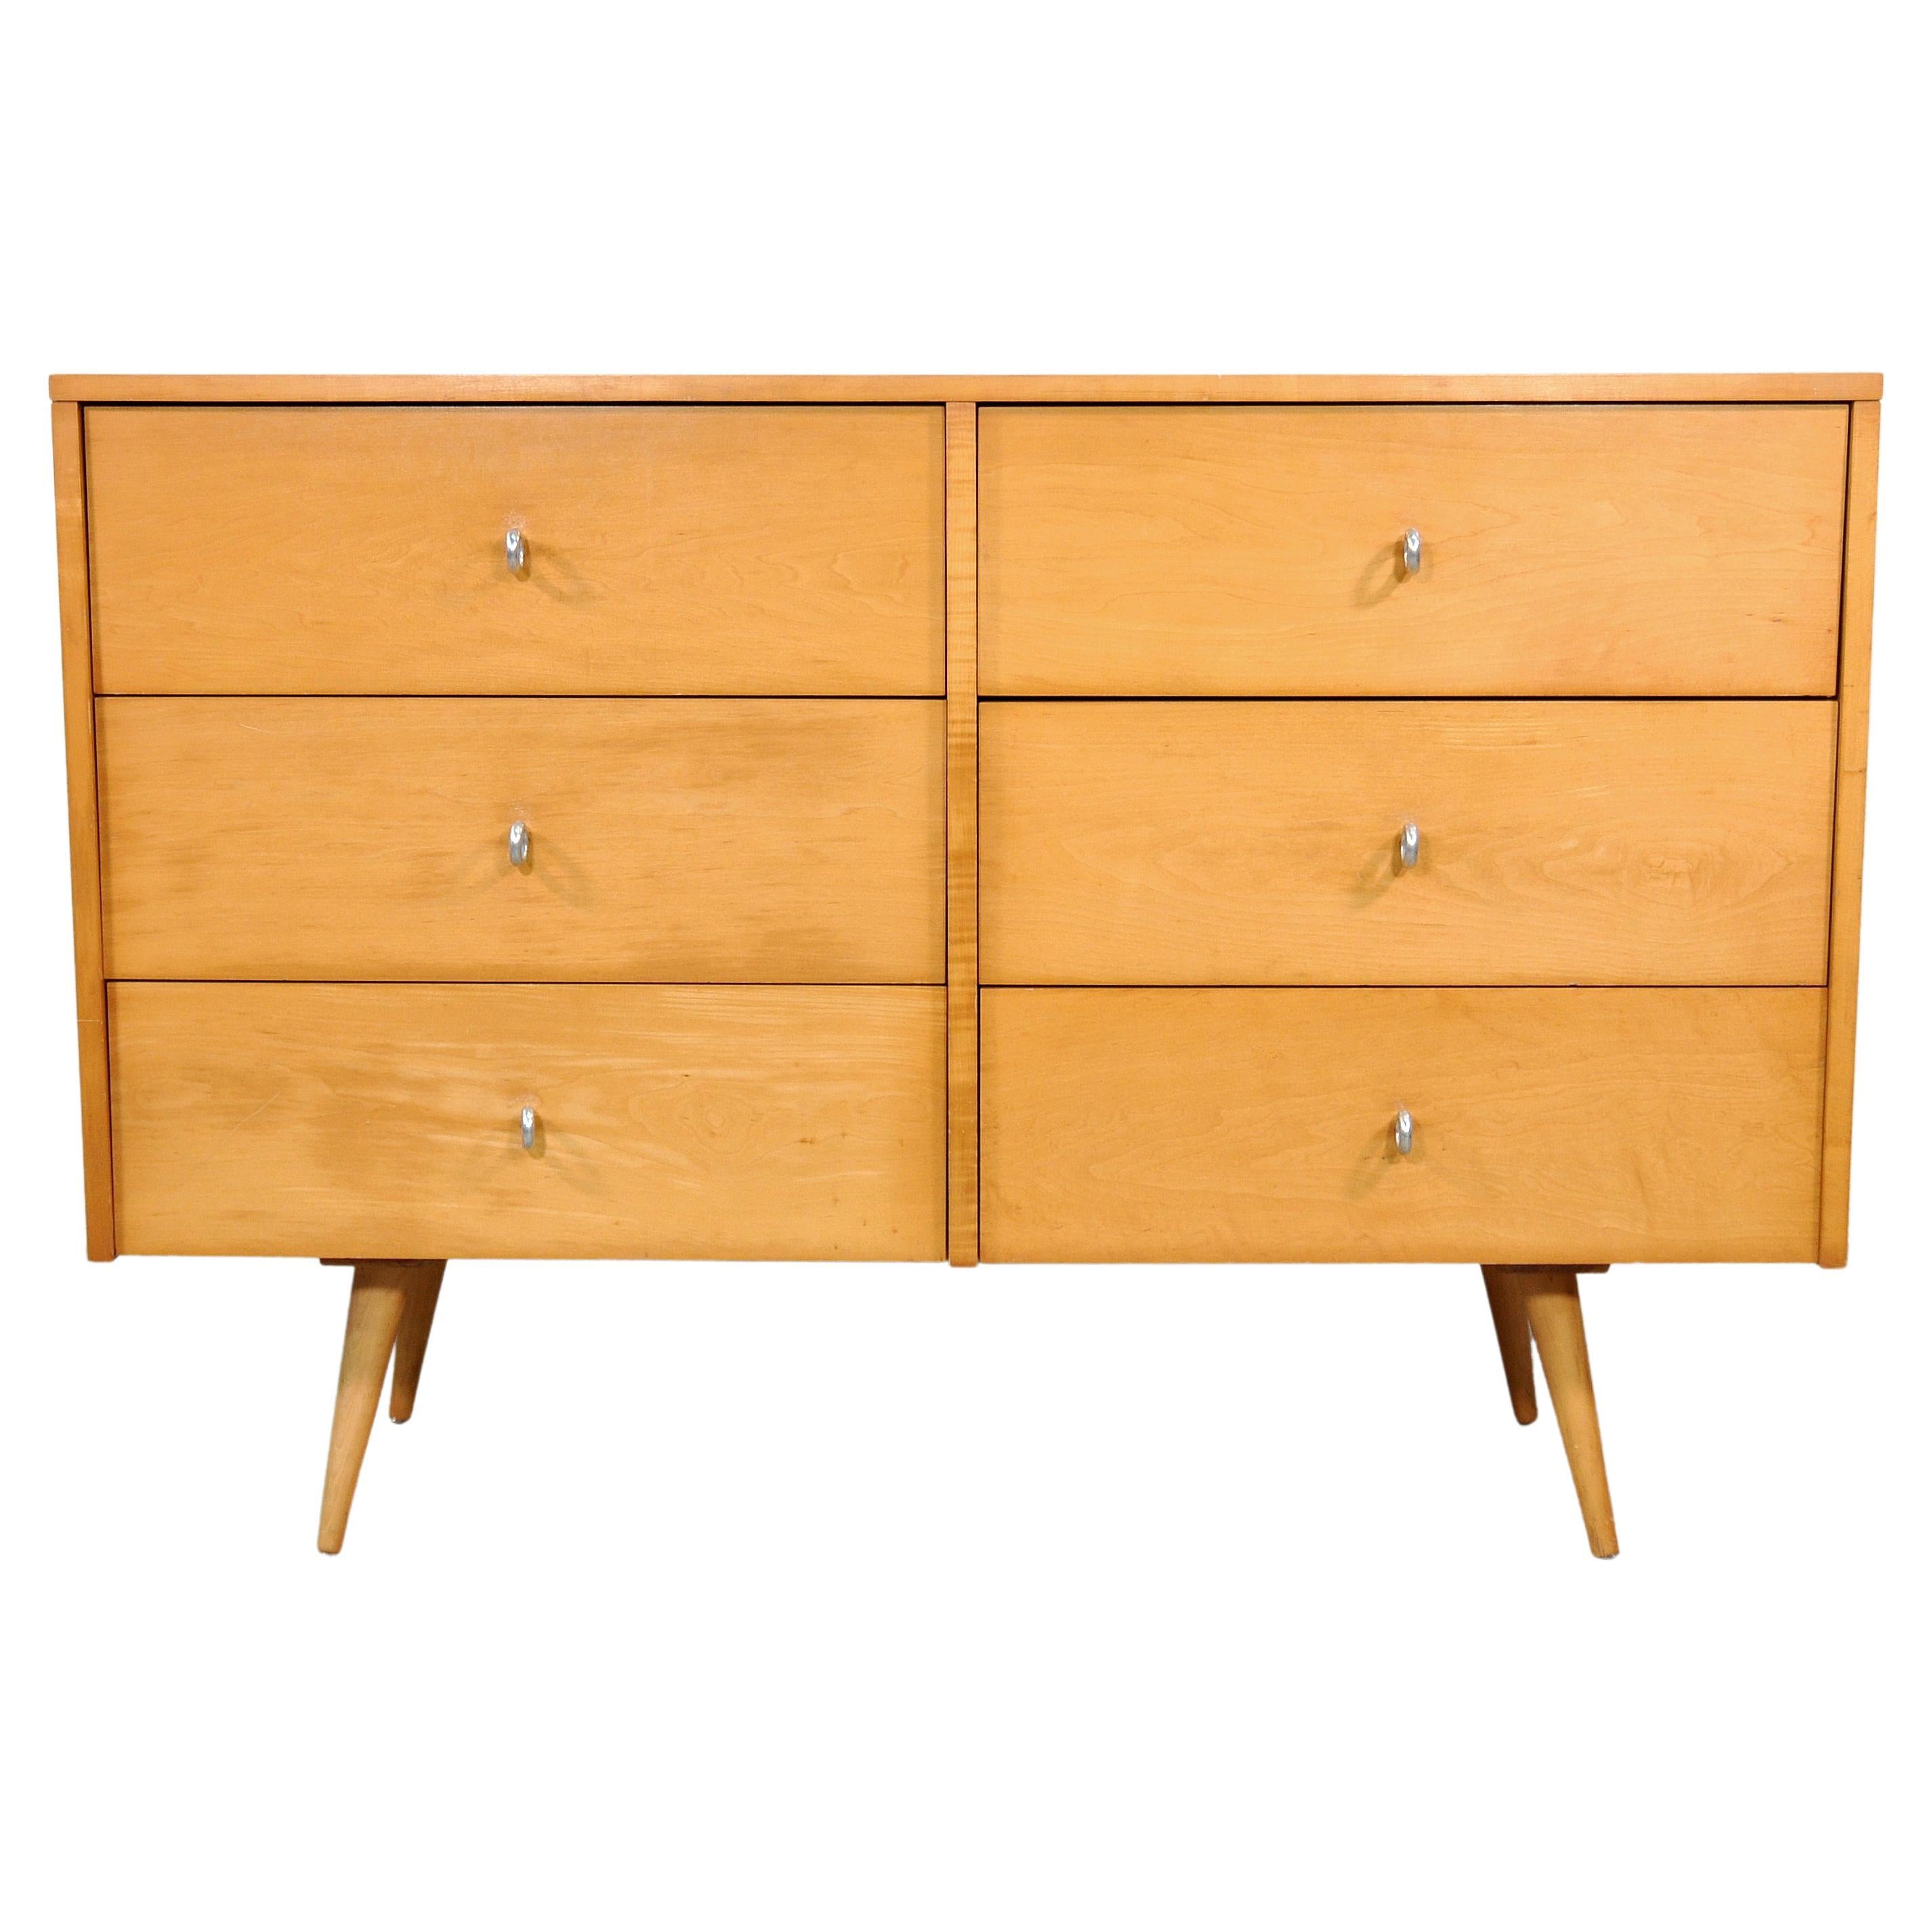 Paul McCobb Maple Double Dresser Planner Group by Winchendon Furniture, 1950s